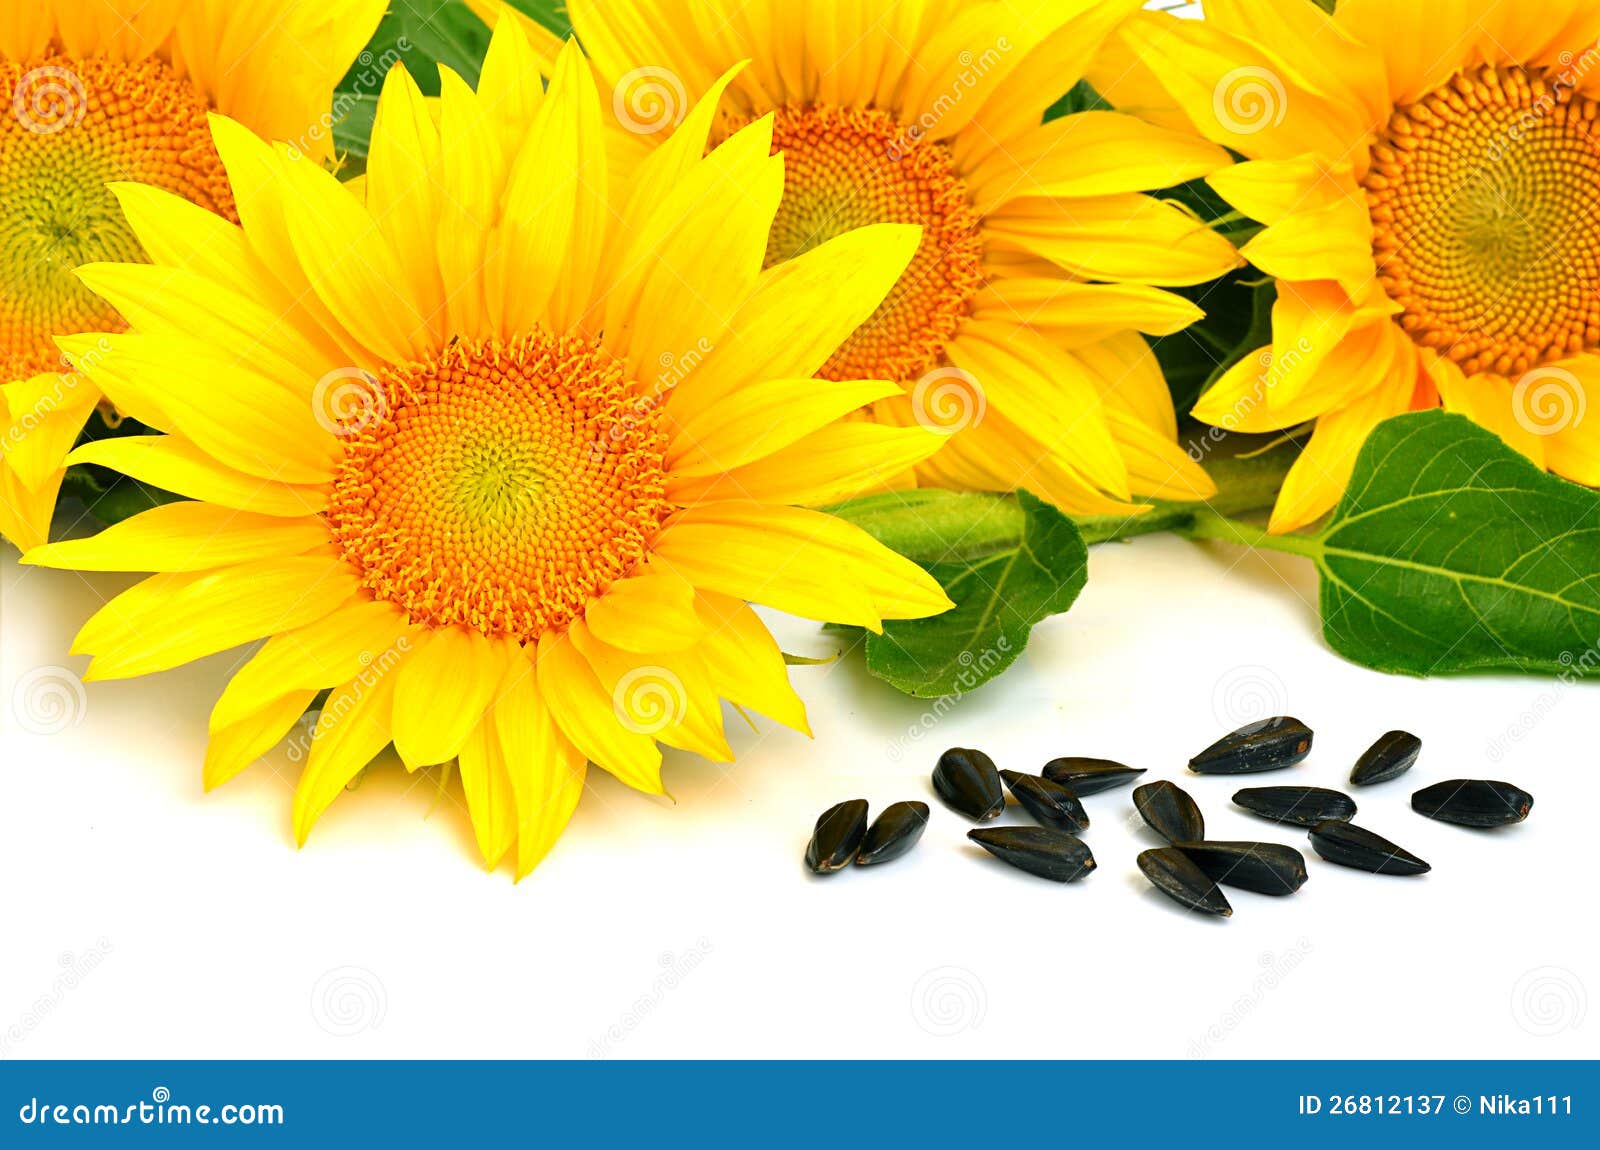 Bright Yellow Sunflowers and Sunflower Seeds Stock Image - Image of ...